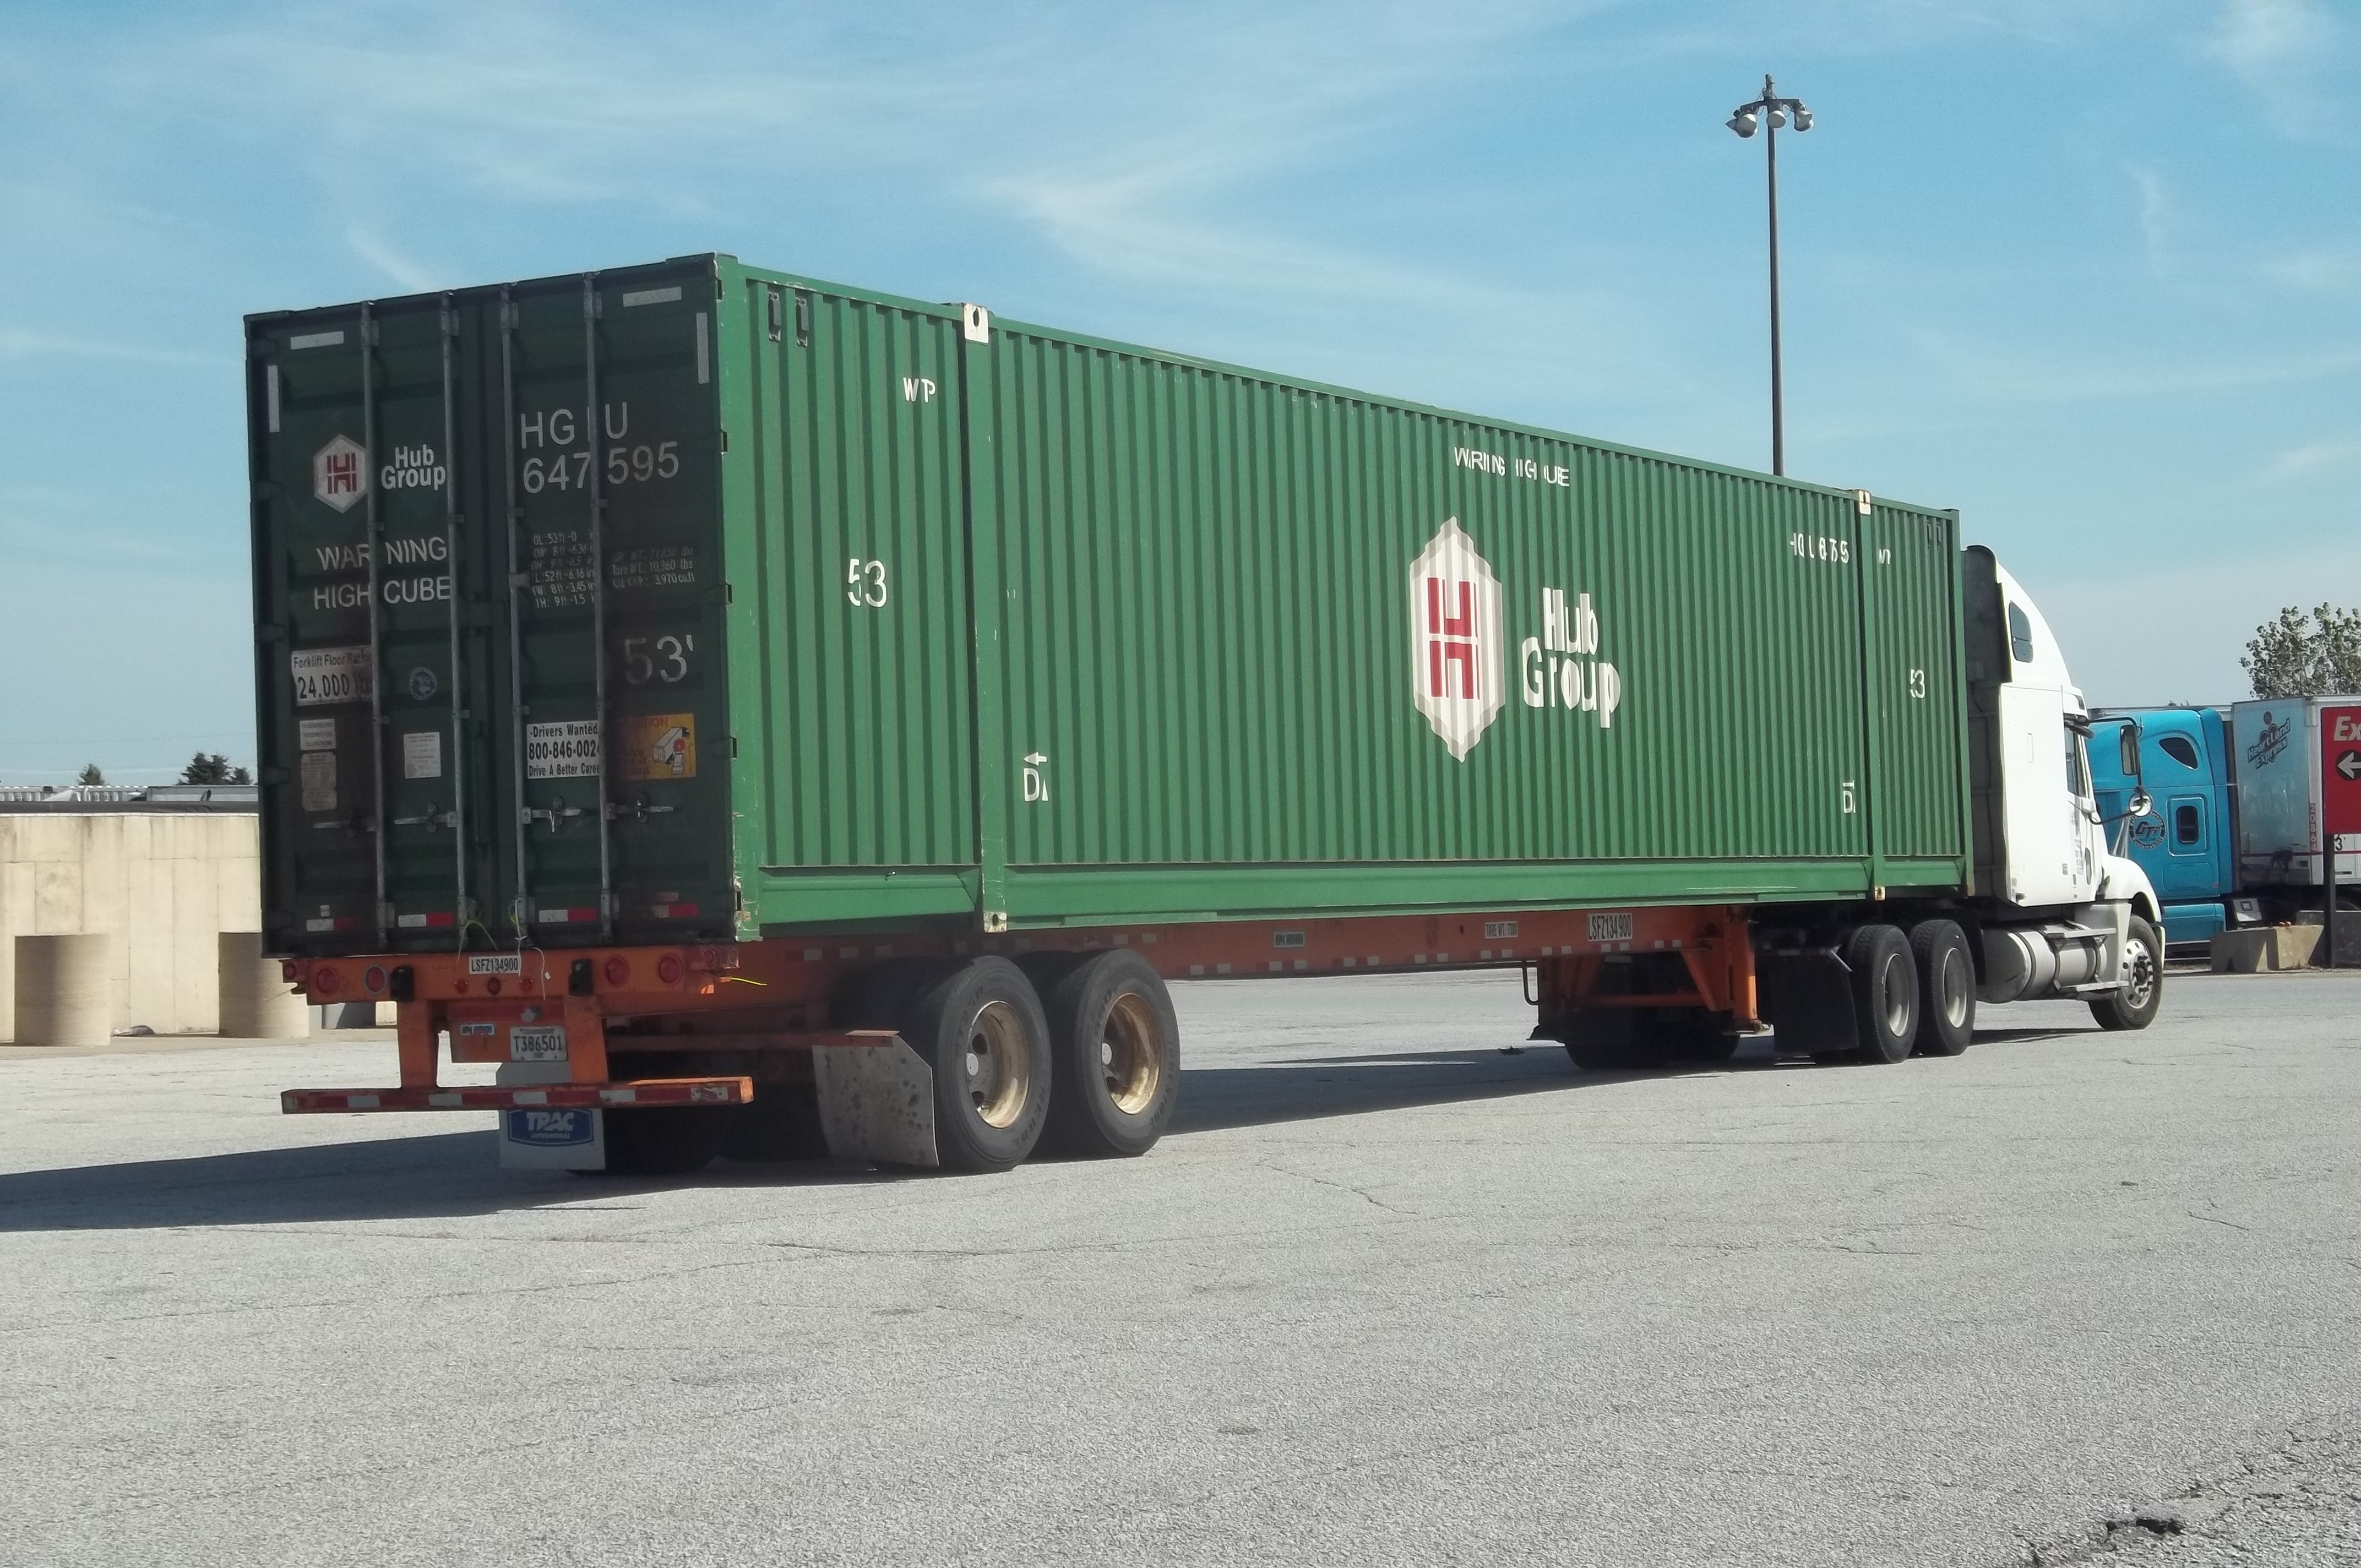 Freight Container on truck